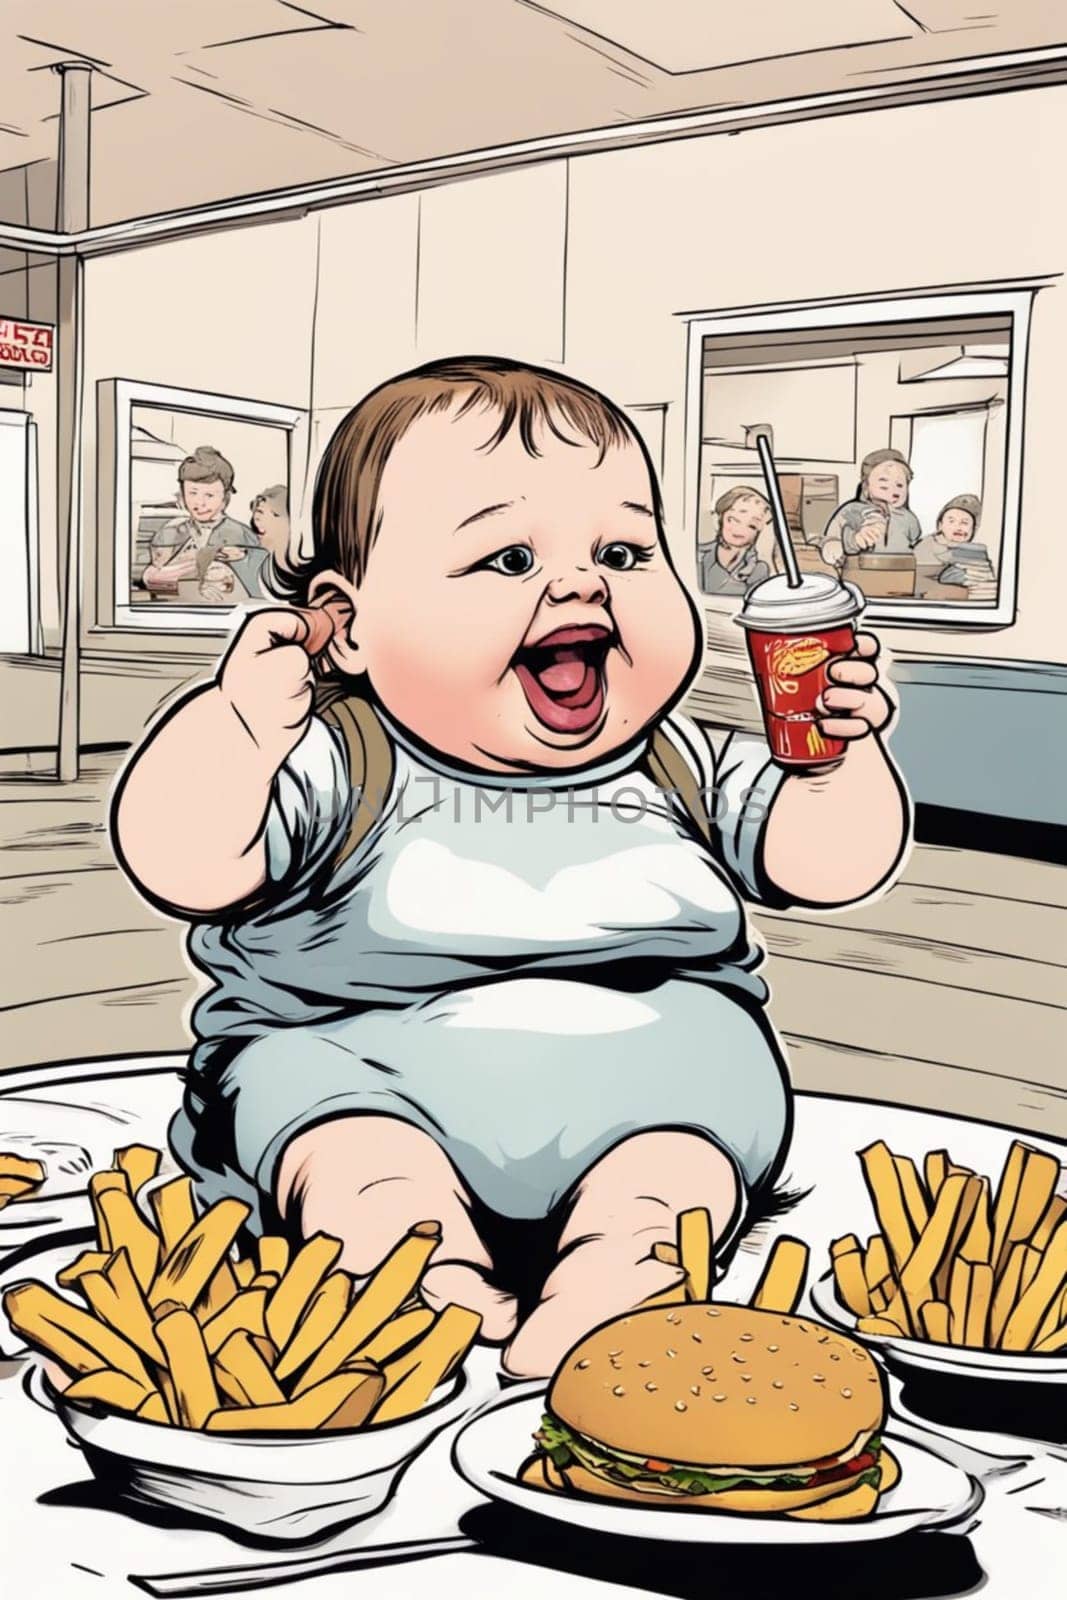 obese boy girl eating fast food , hamburger, french fries - unhealthy eating concept illustration generative ai art